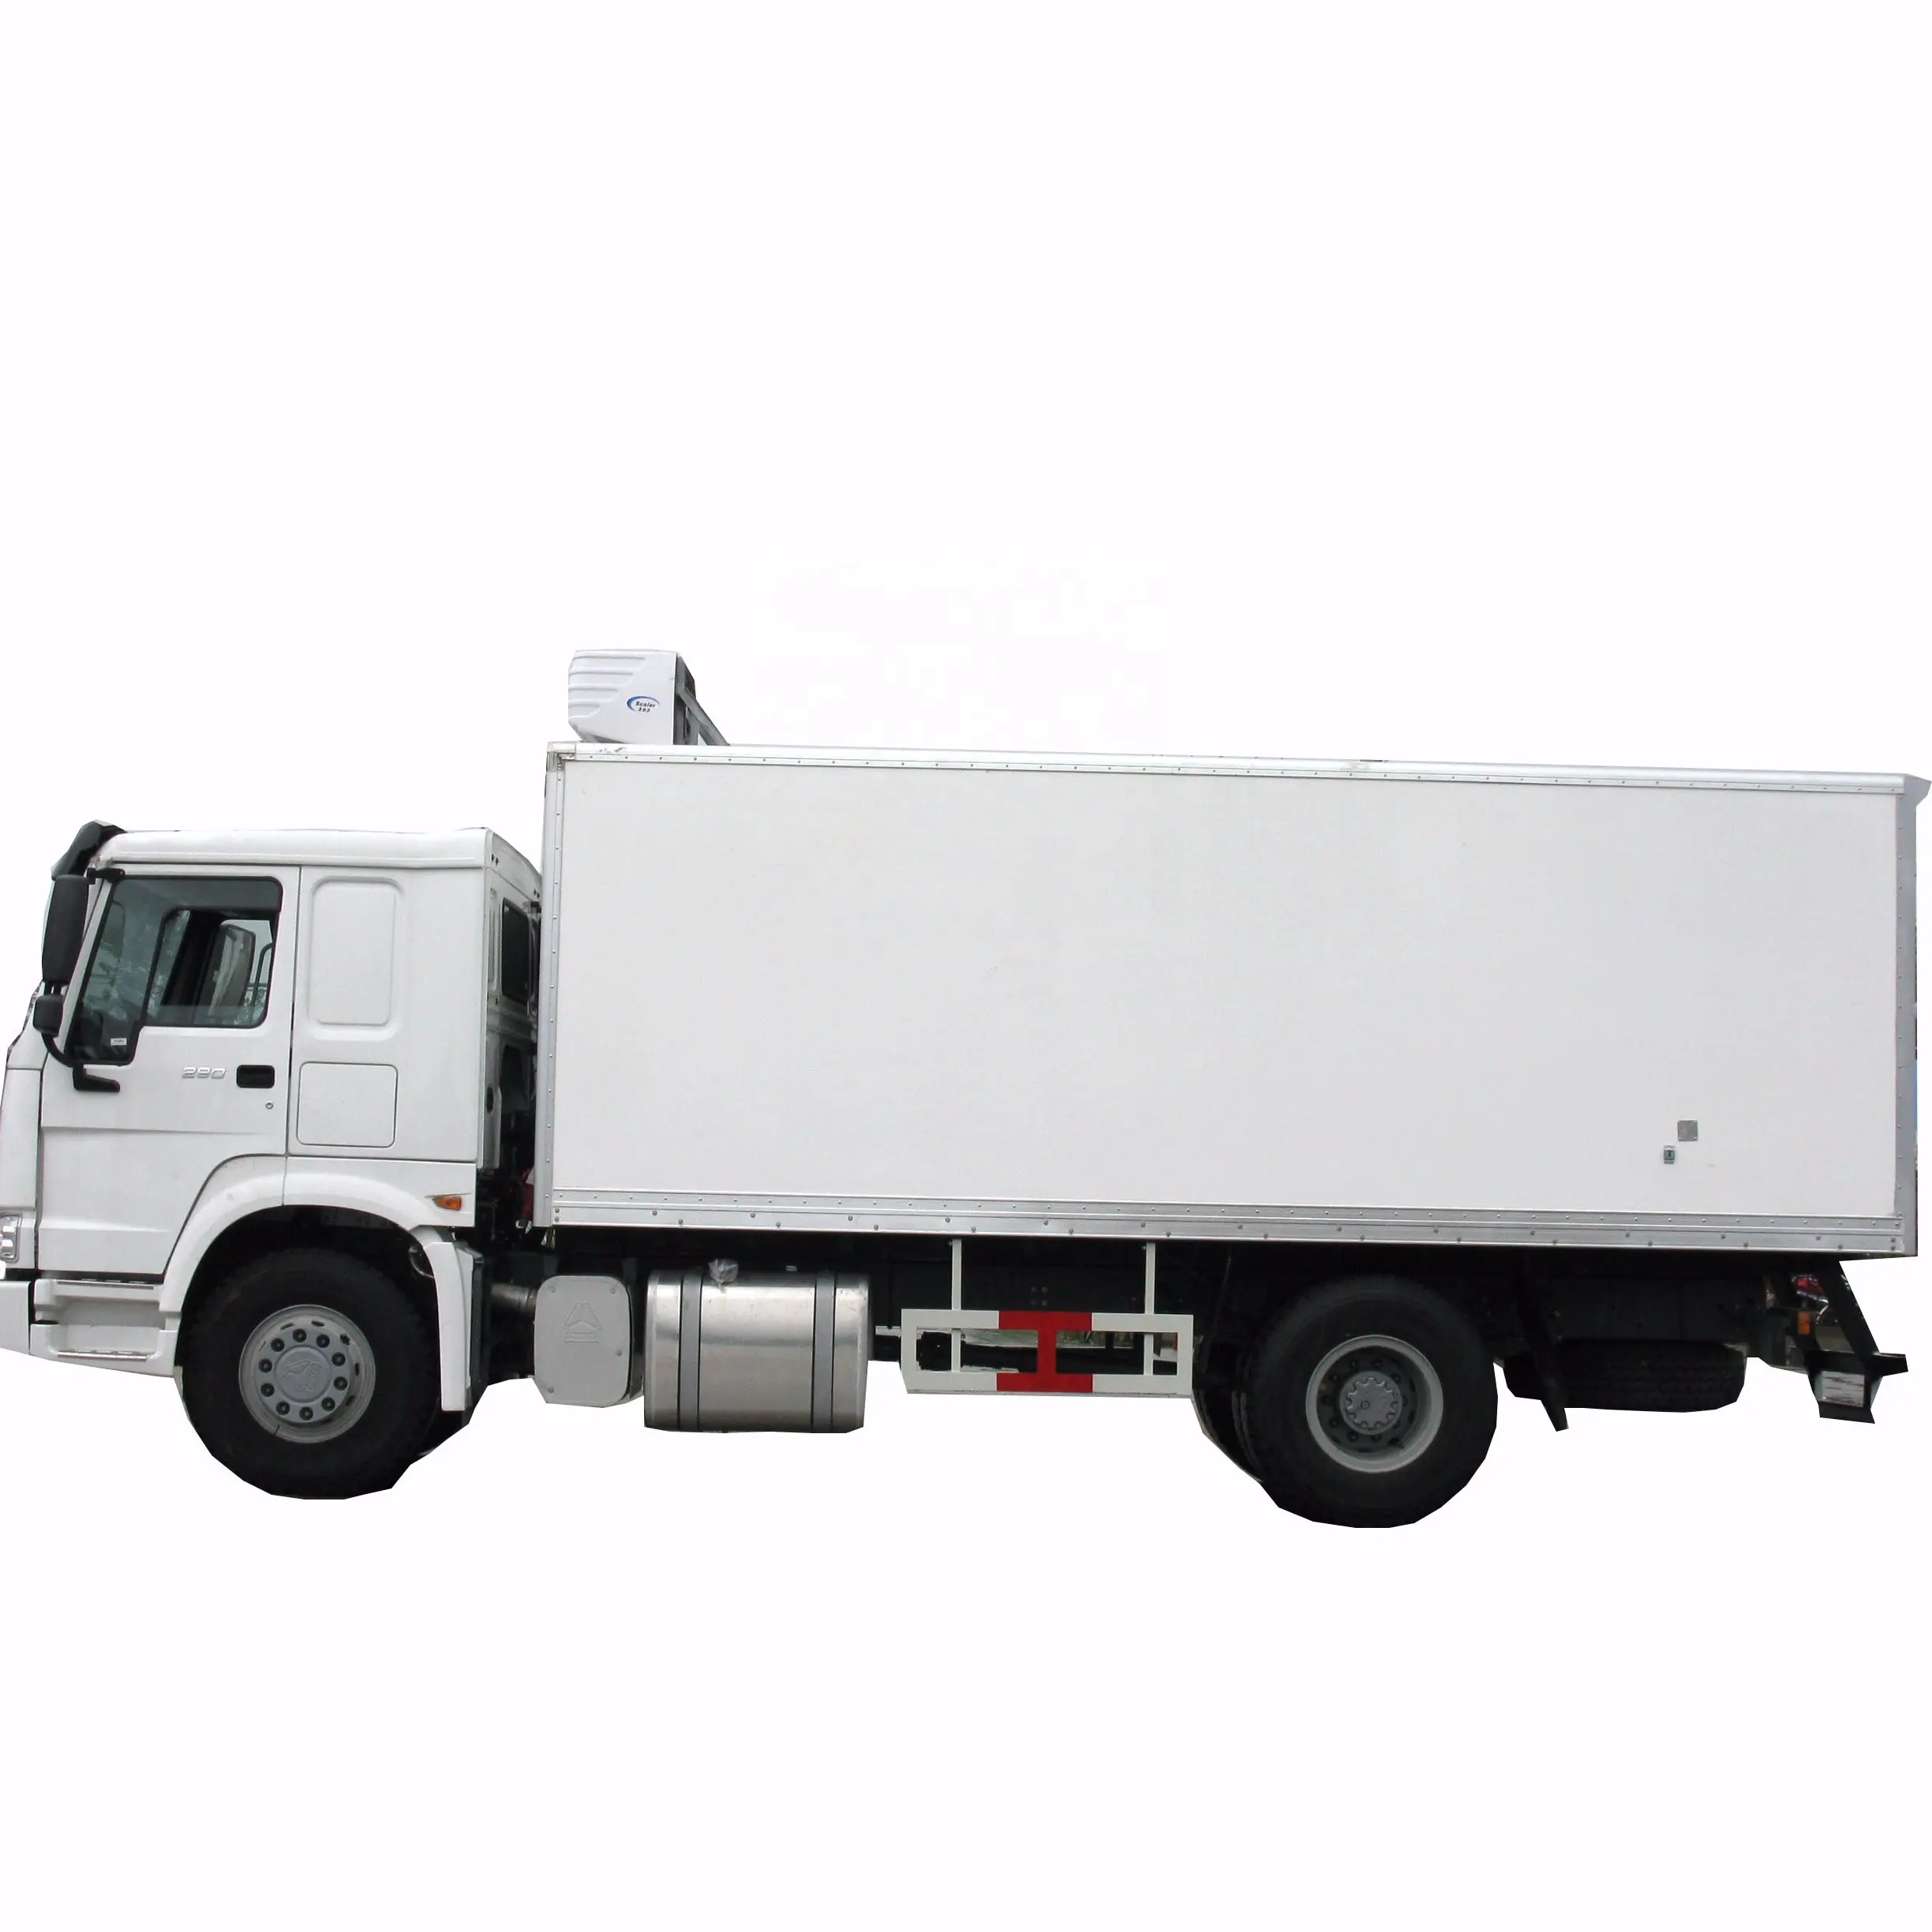 HOWO 4 × 2 Food Truck Refrigerated Freezer Truck 10 Ton Box Thermo King Truck Refrigeration Units FreezerためSale Best Price